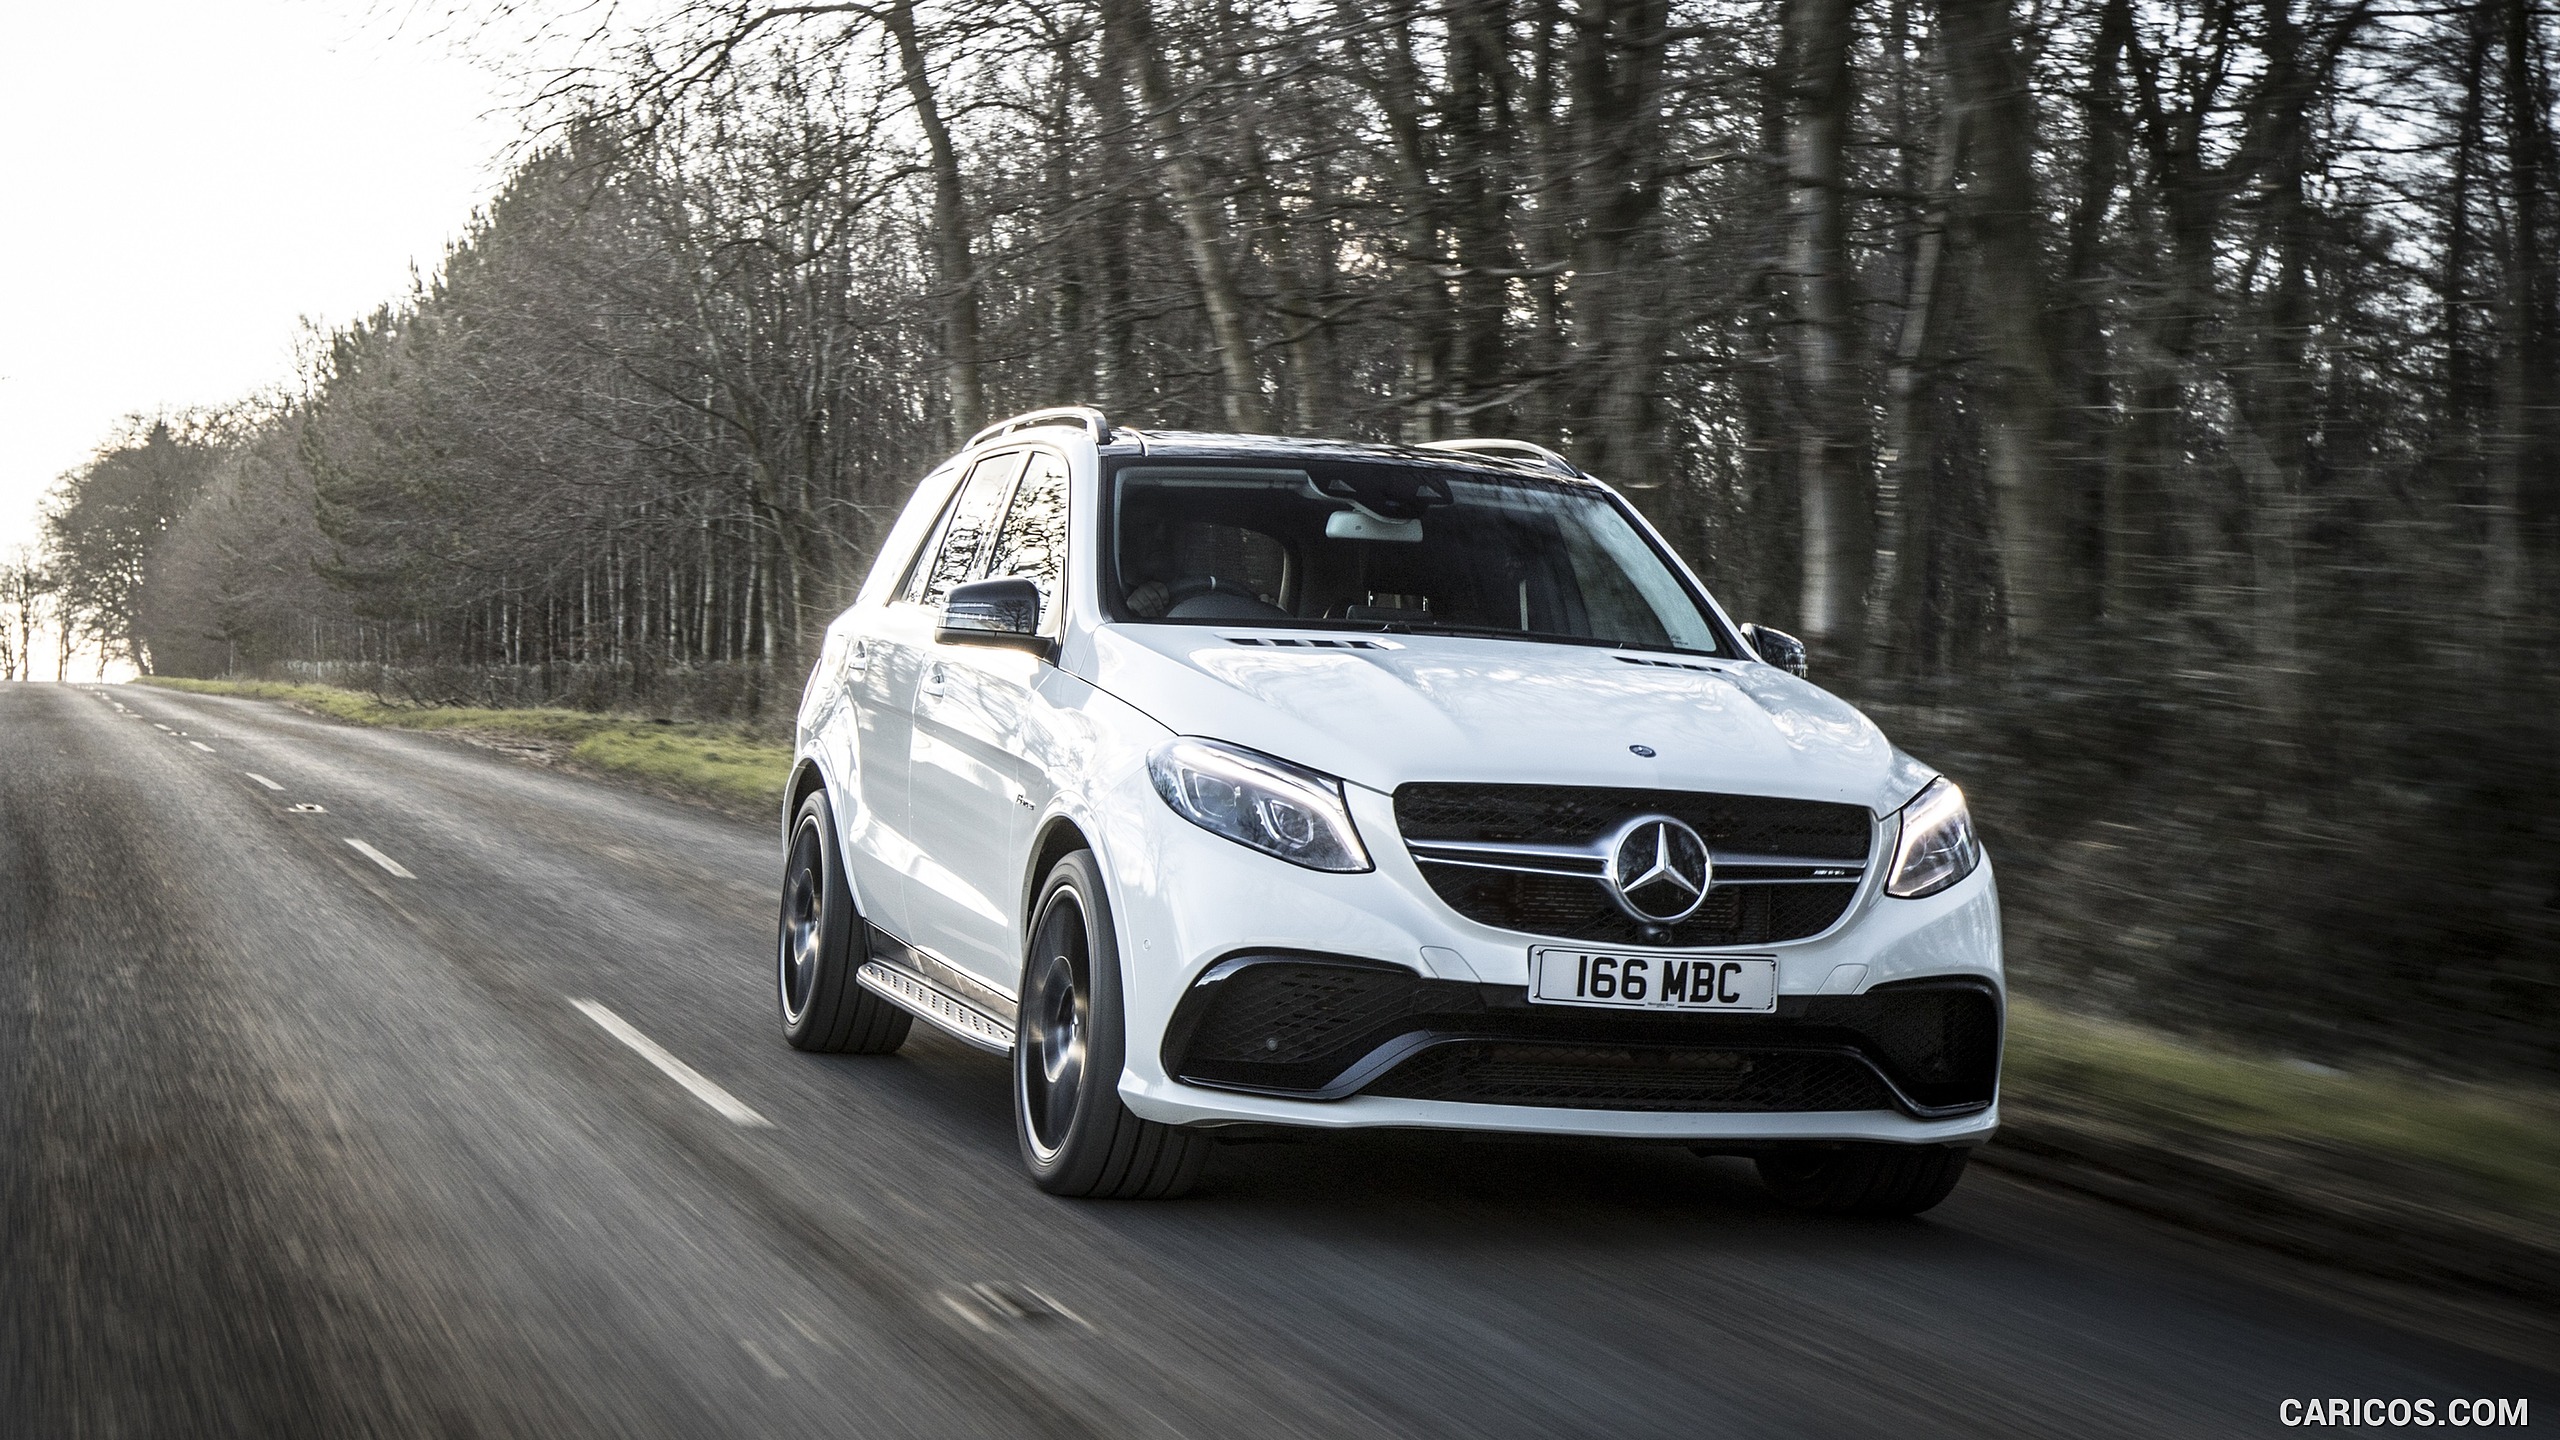 2016 Mercedes-AMG GLE 63 S (UK-Spec) - Front, #46 of 68